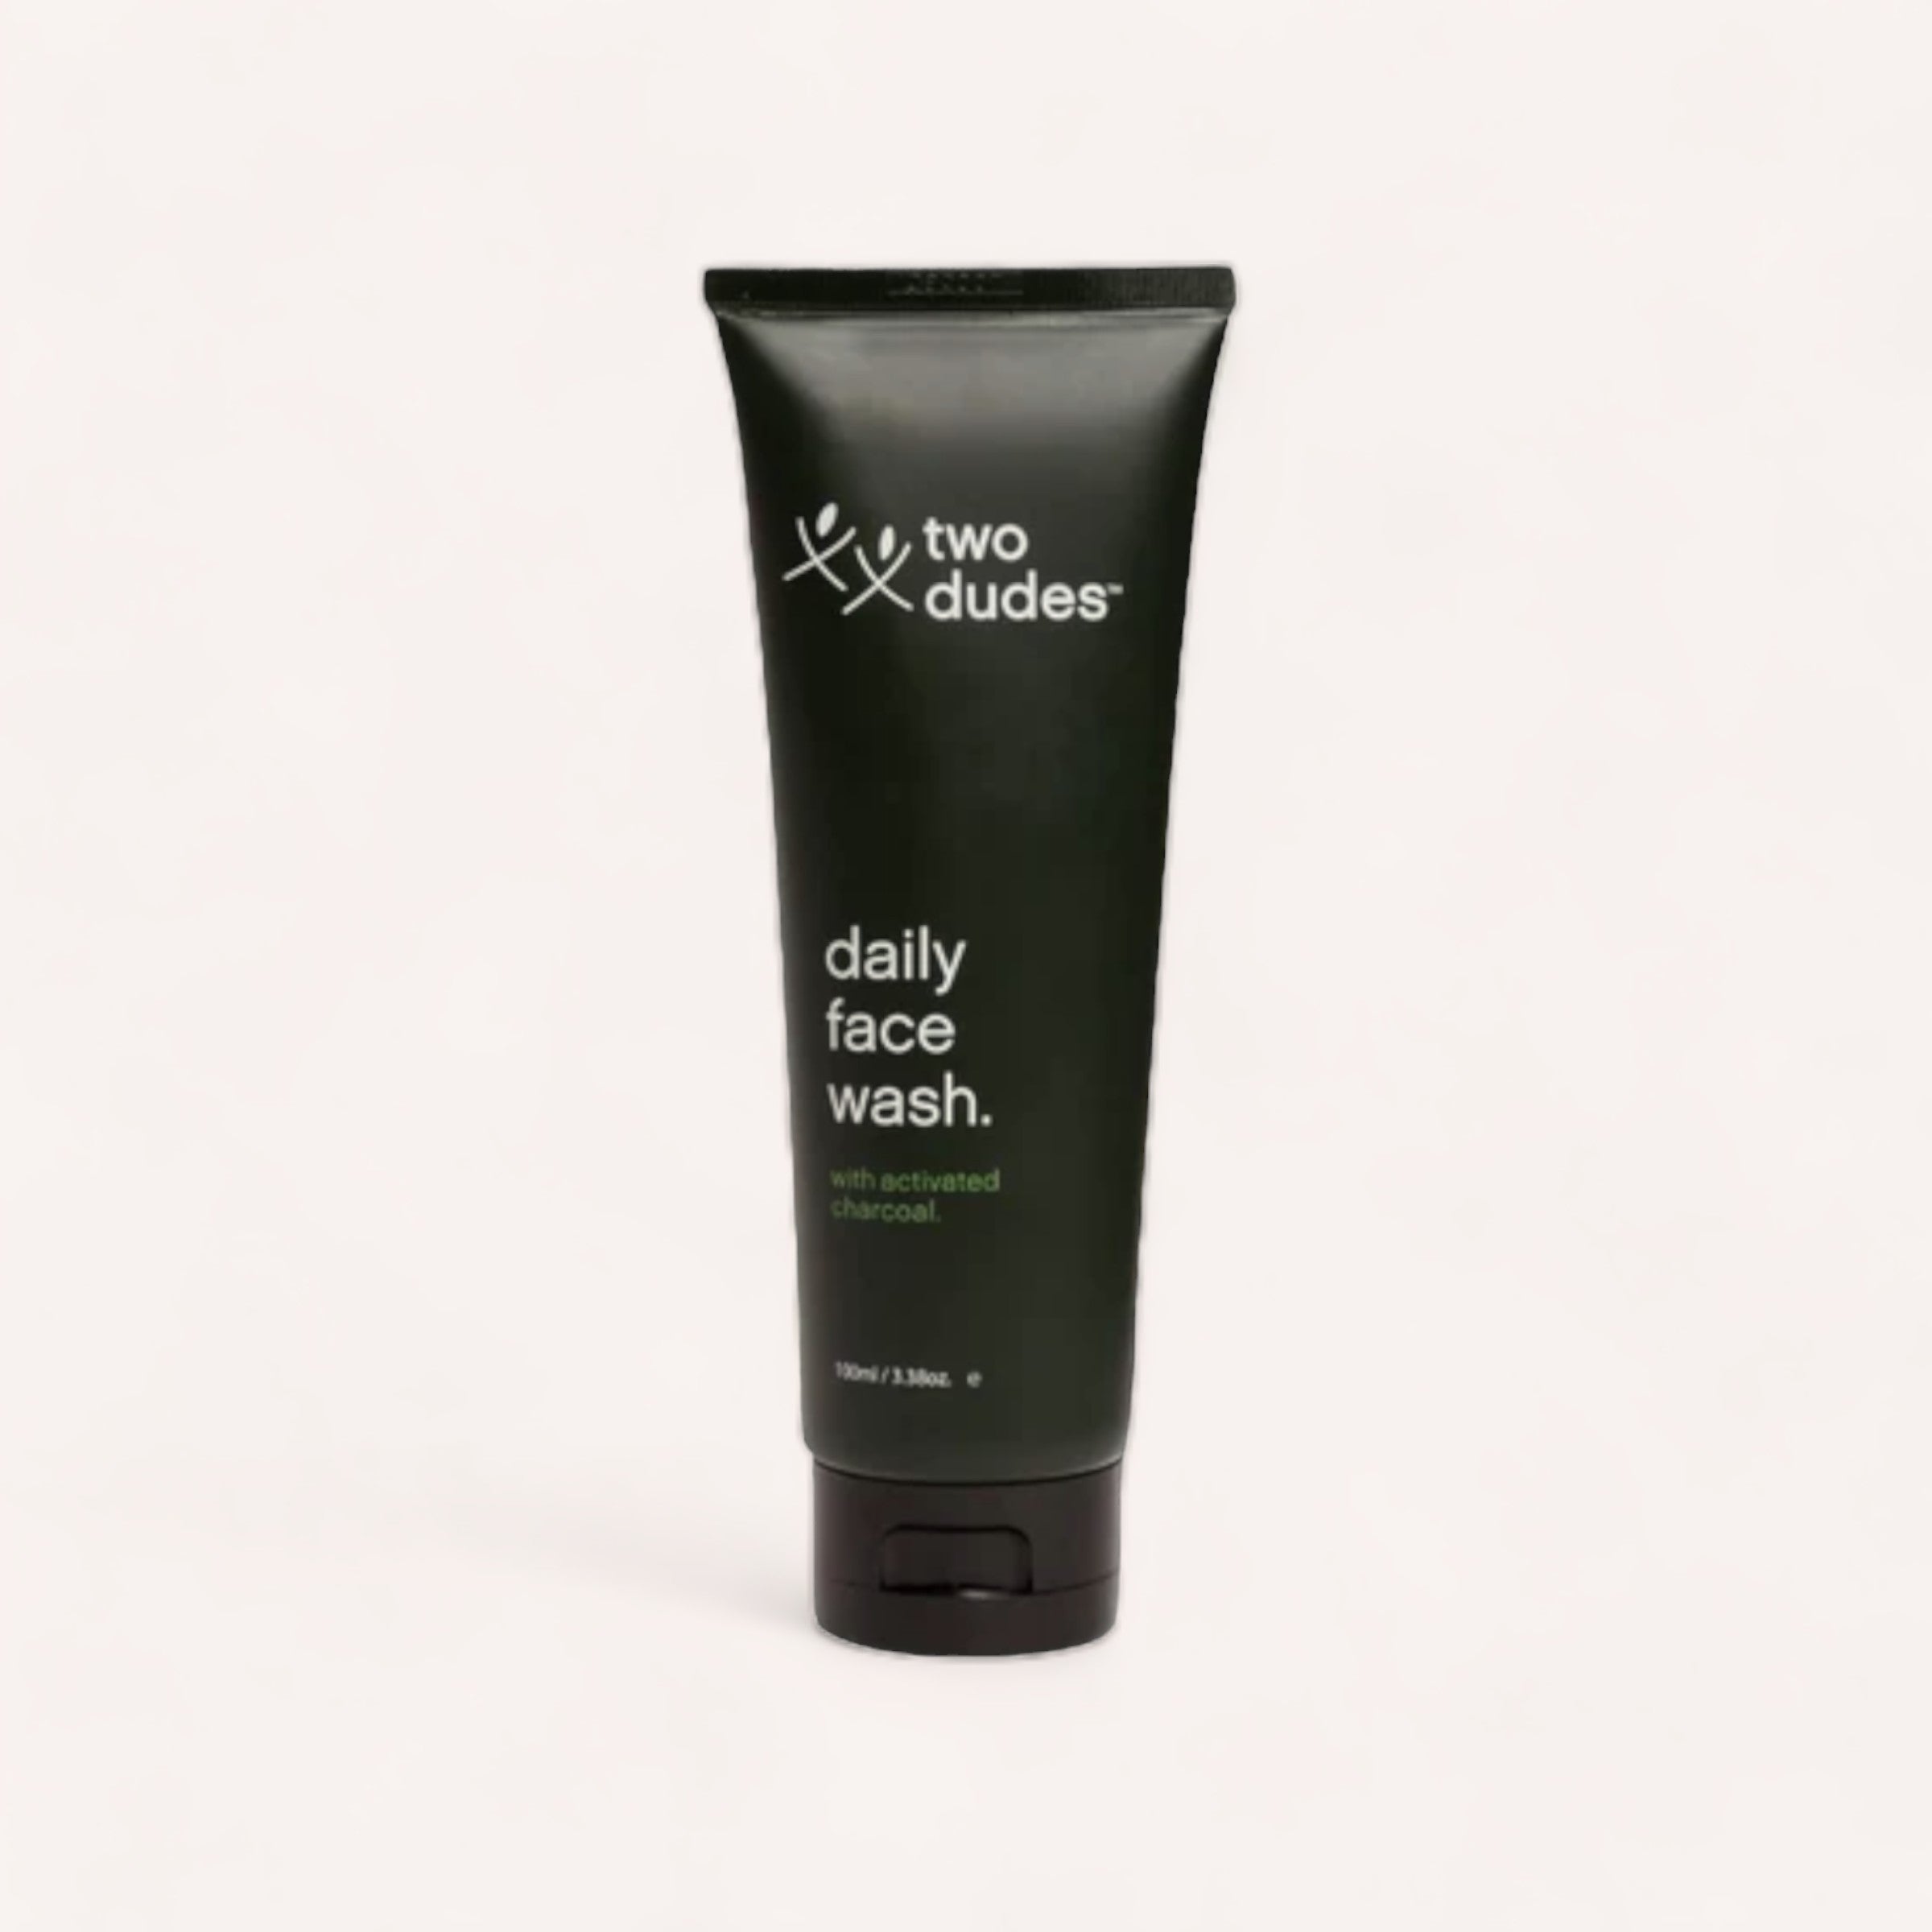 activated charcoal daily face wash by two dudes